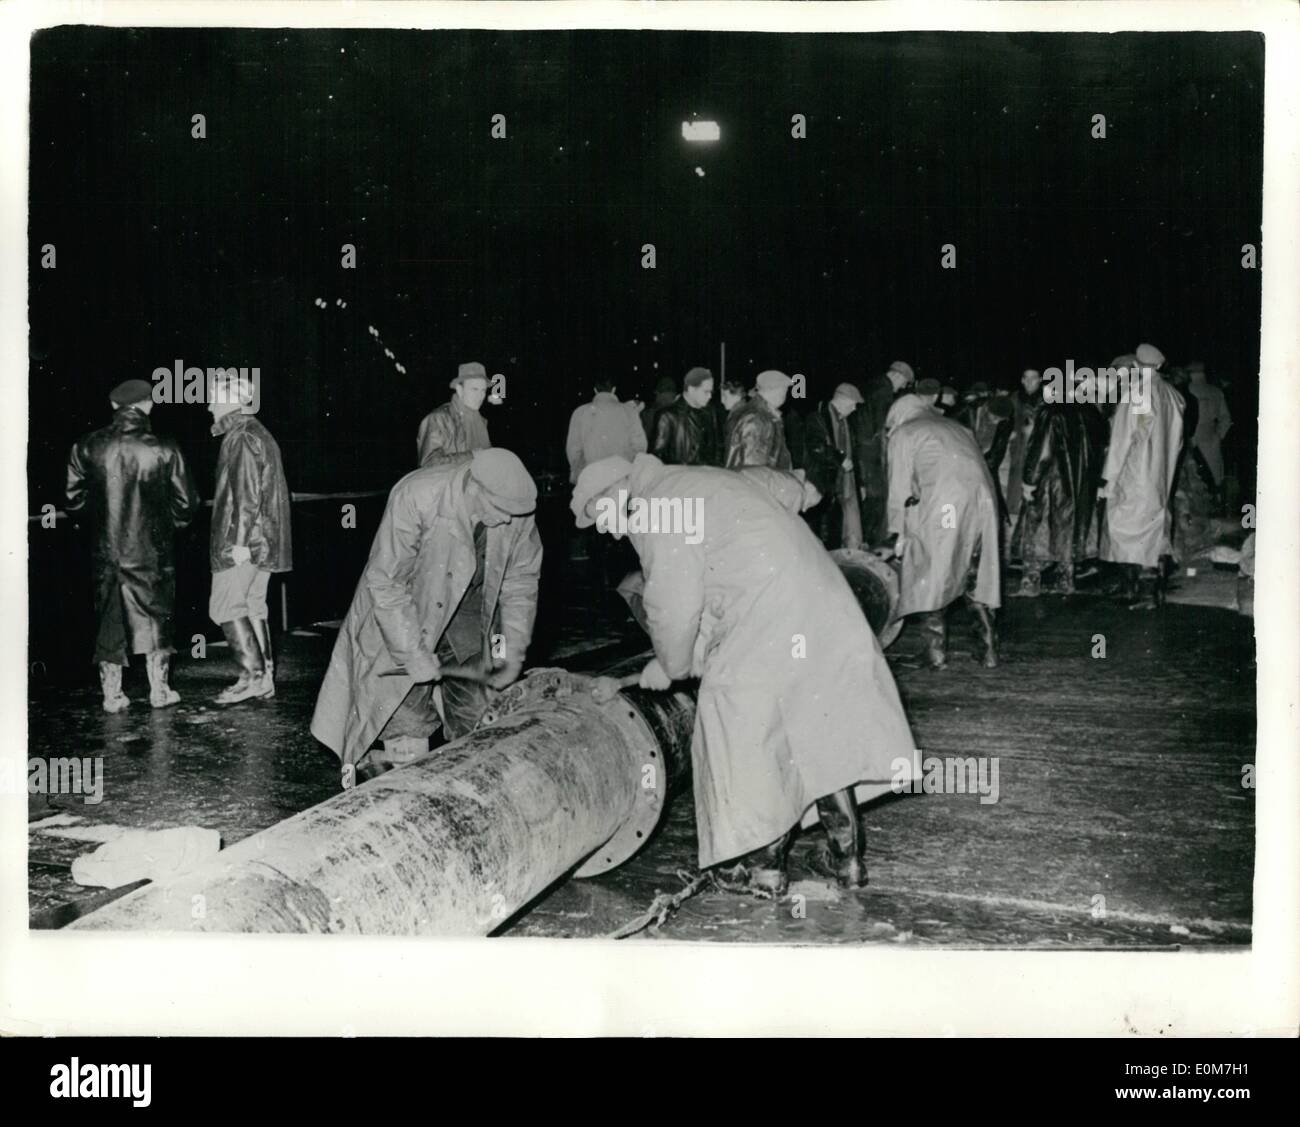 Nov. 11, 1953 - Holland closes the breeches. The final dykes are repaired. Photo shows: Work progresses far into the nigh tightening the drain pipe connections - during the placing into position of the final caissons at Ouwerkerk at the Isle of Schouwan - to complete the work which has been going on throughout the Netherlands repairing the flood walls - since the disastrous floods which wrought havoc last February. Stock Photo